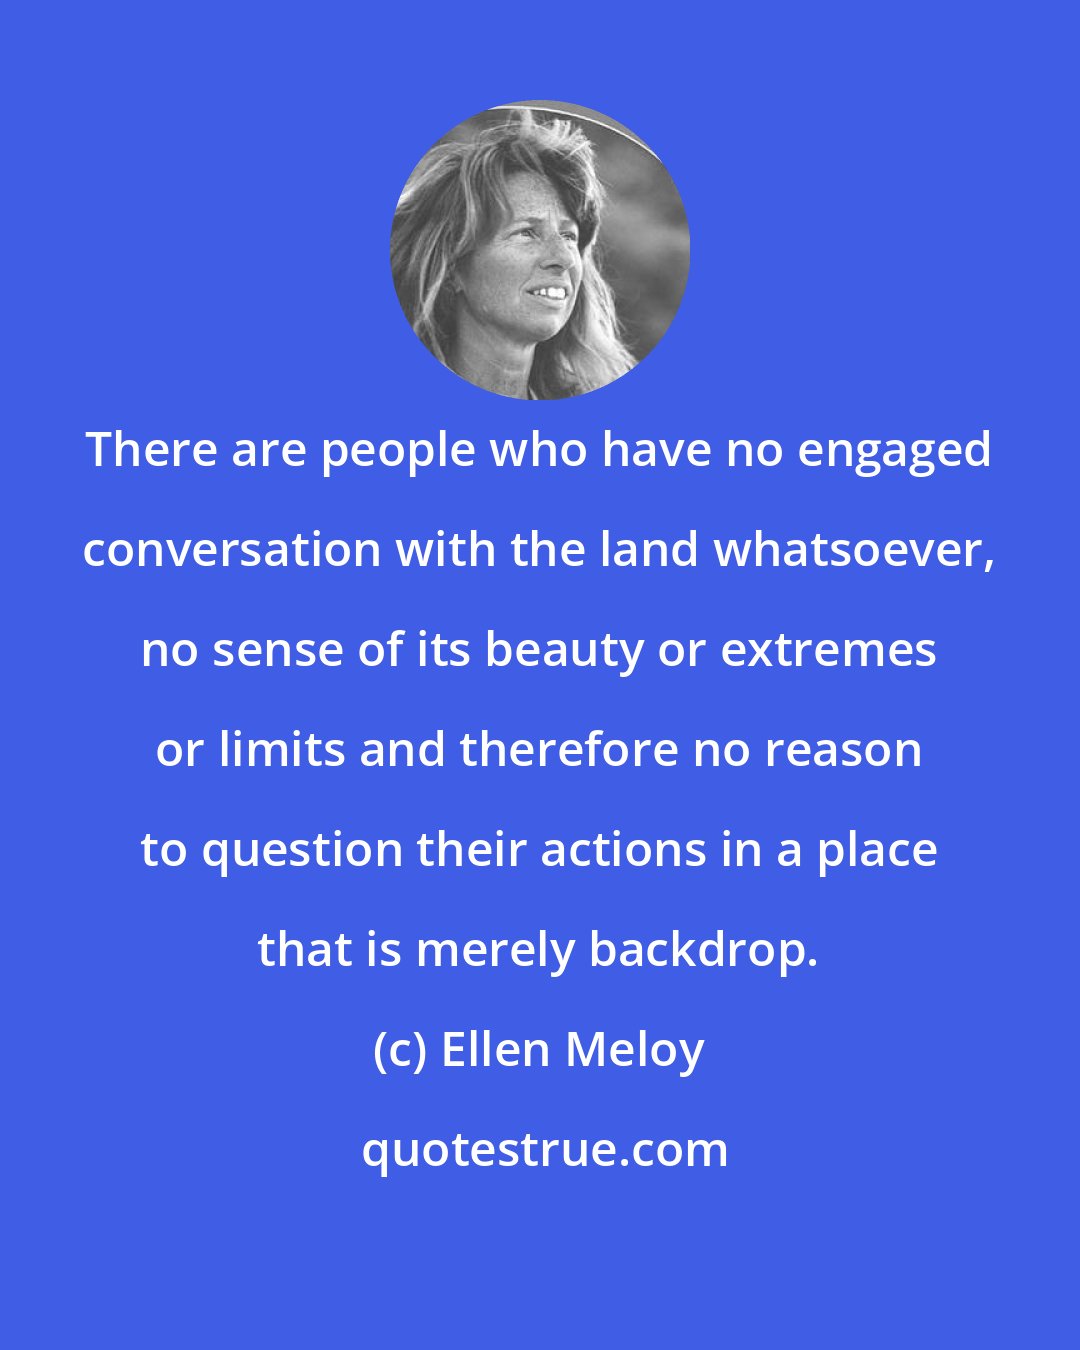 Ellen Meloy: There are people who have no engaged conversation with the land whatsoever, no sense of its beauty or extremes or limits and therefore no reason to question their actions in a place that is merely backdrop.